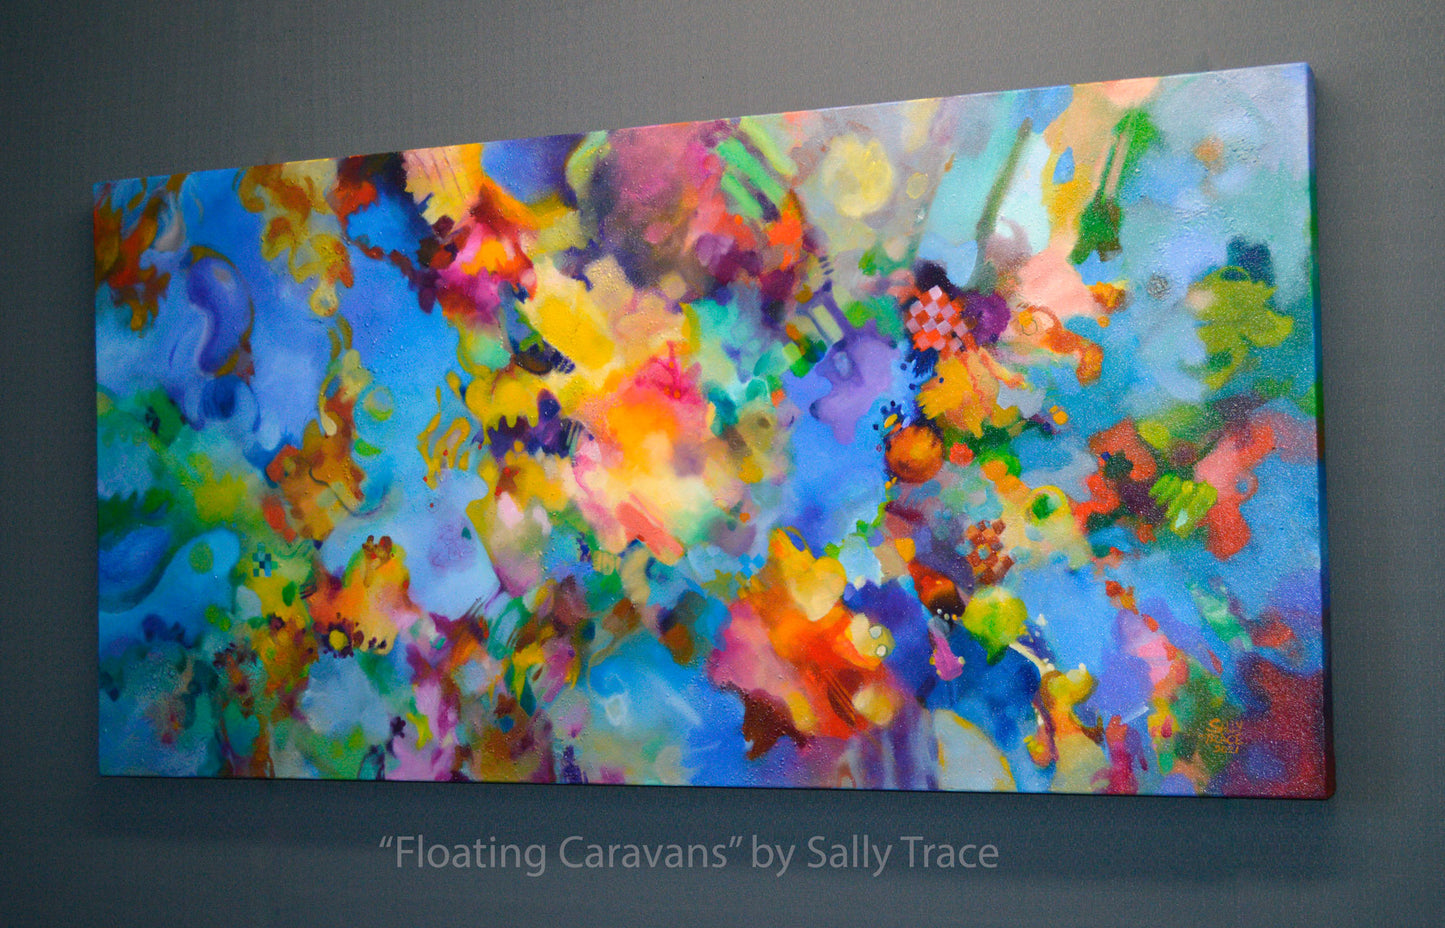 Living room large abstract wall art, original contemporary abstract artwork for sale, acrylic on canvas painting "Floating Caravans" by Sally Trace.  A textured expressionist original painting, right view